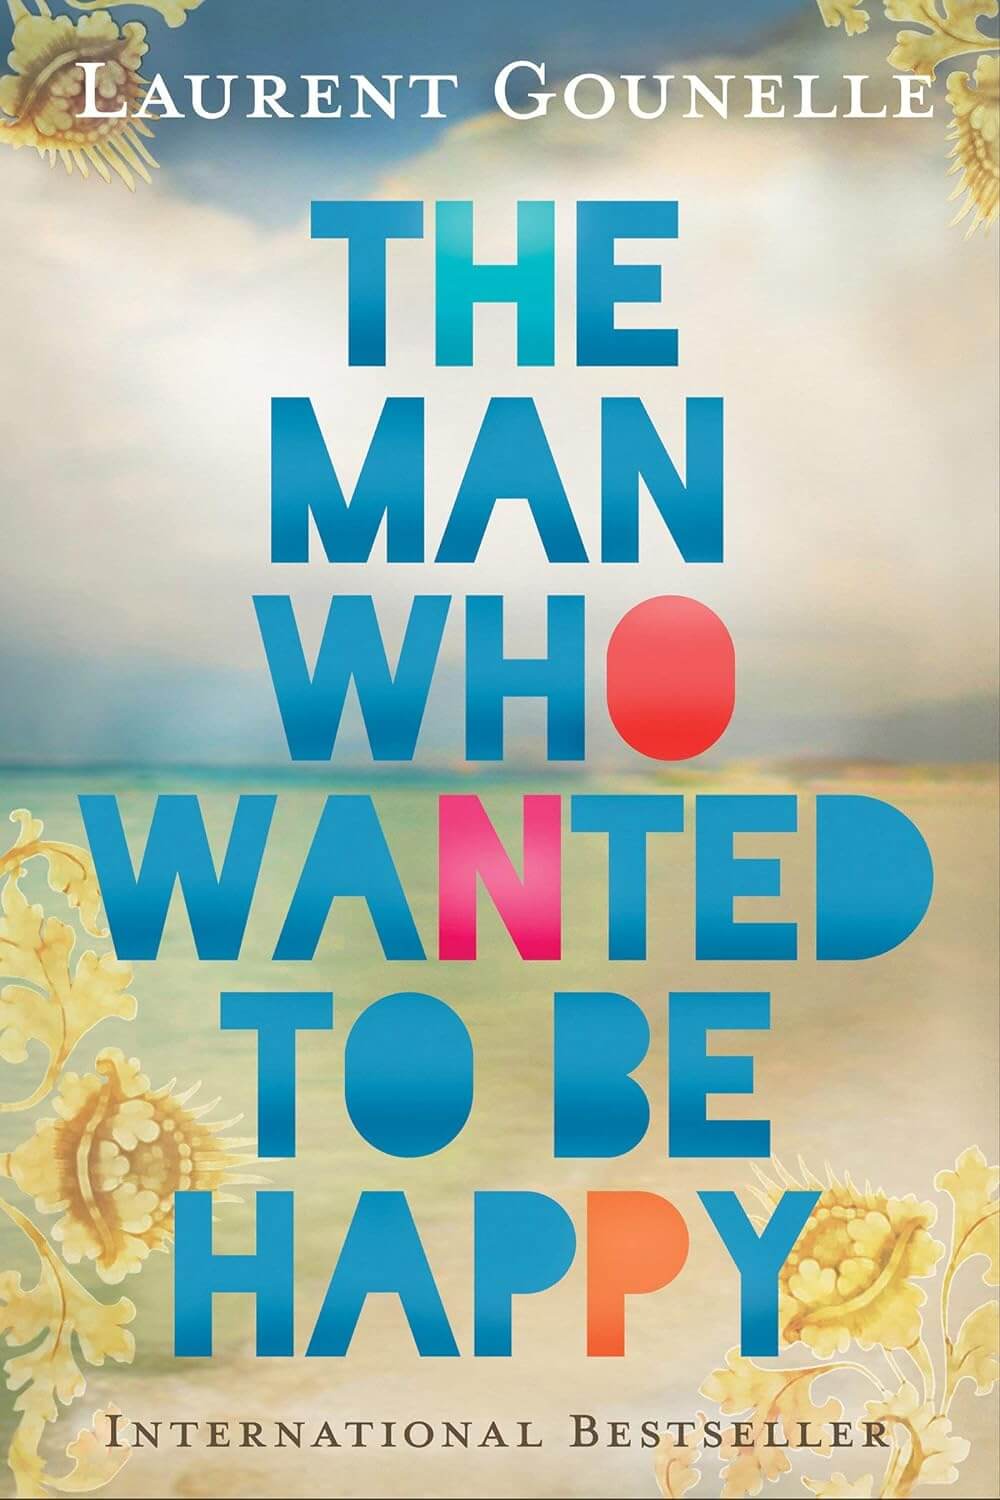 The Man Who Wanted To Be Happy by Laurent Gounelle